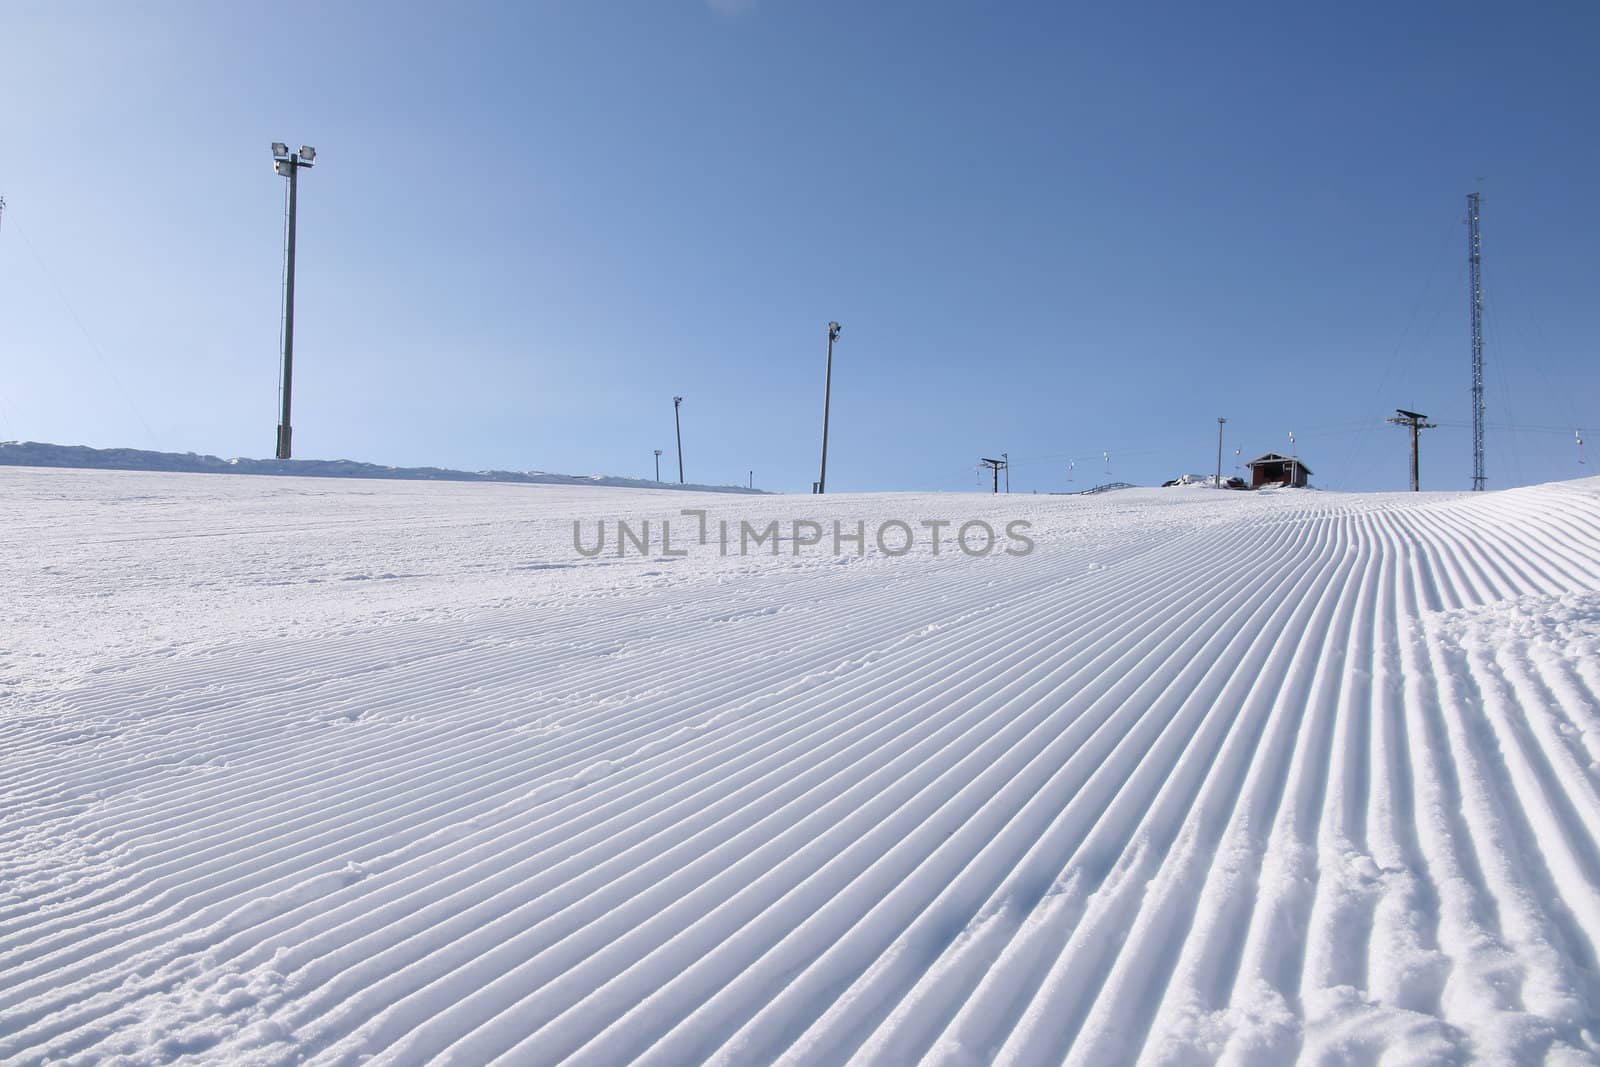 A newly groomed skislope under a clear blue sky